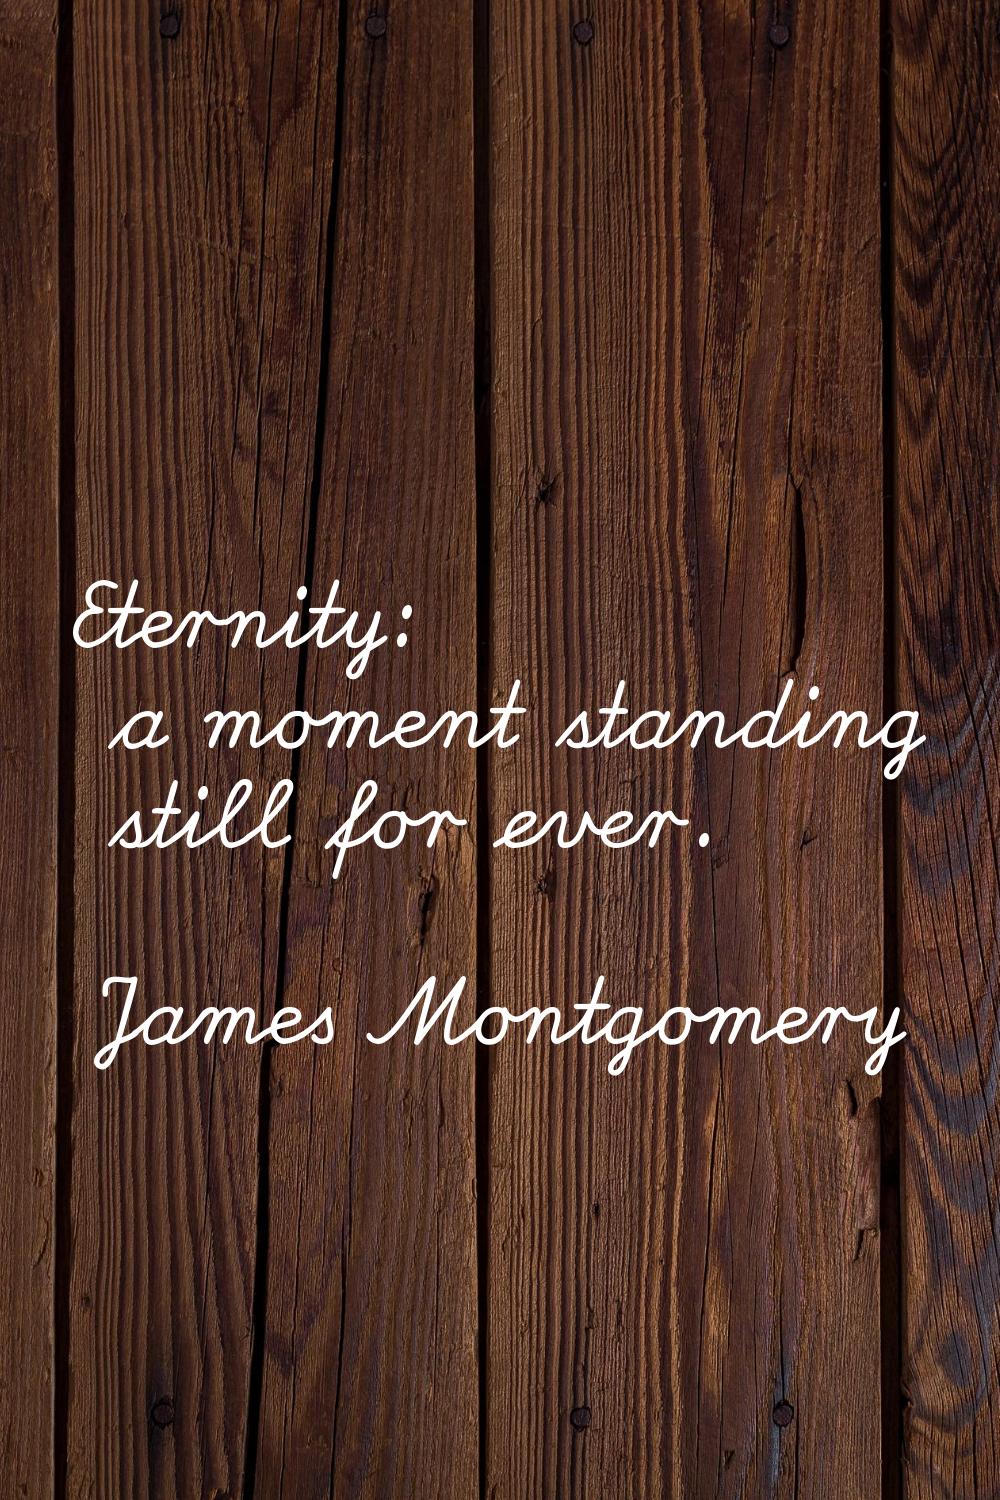 Eternity: a moment standing still for ever.